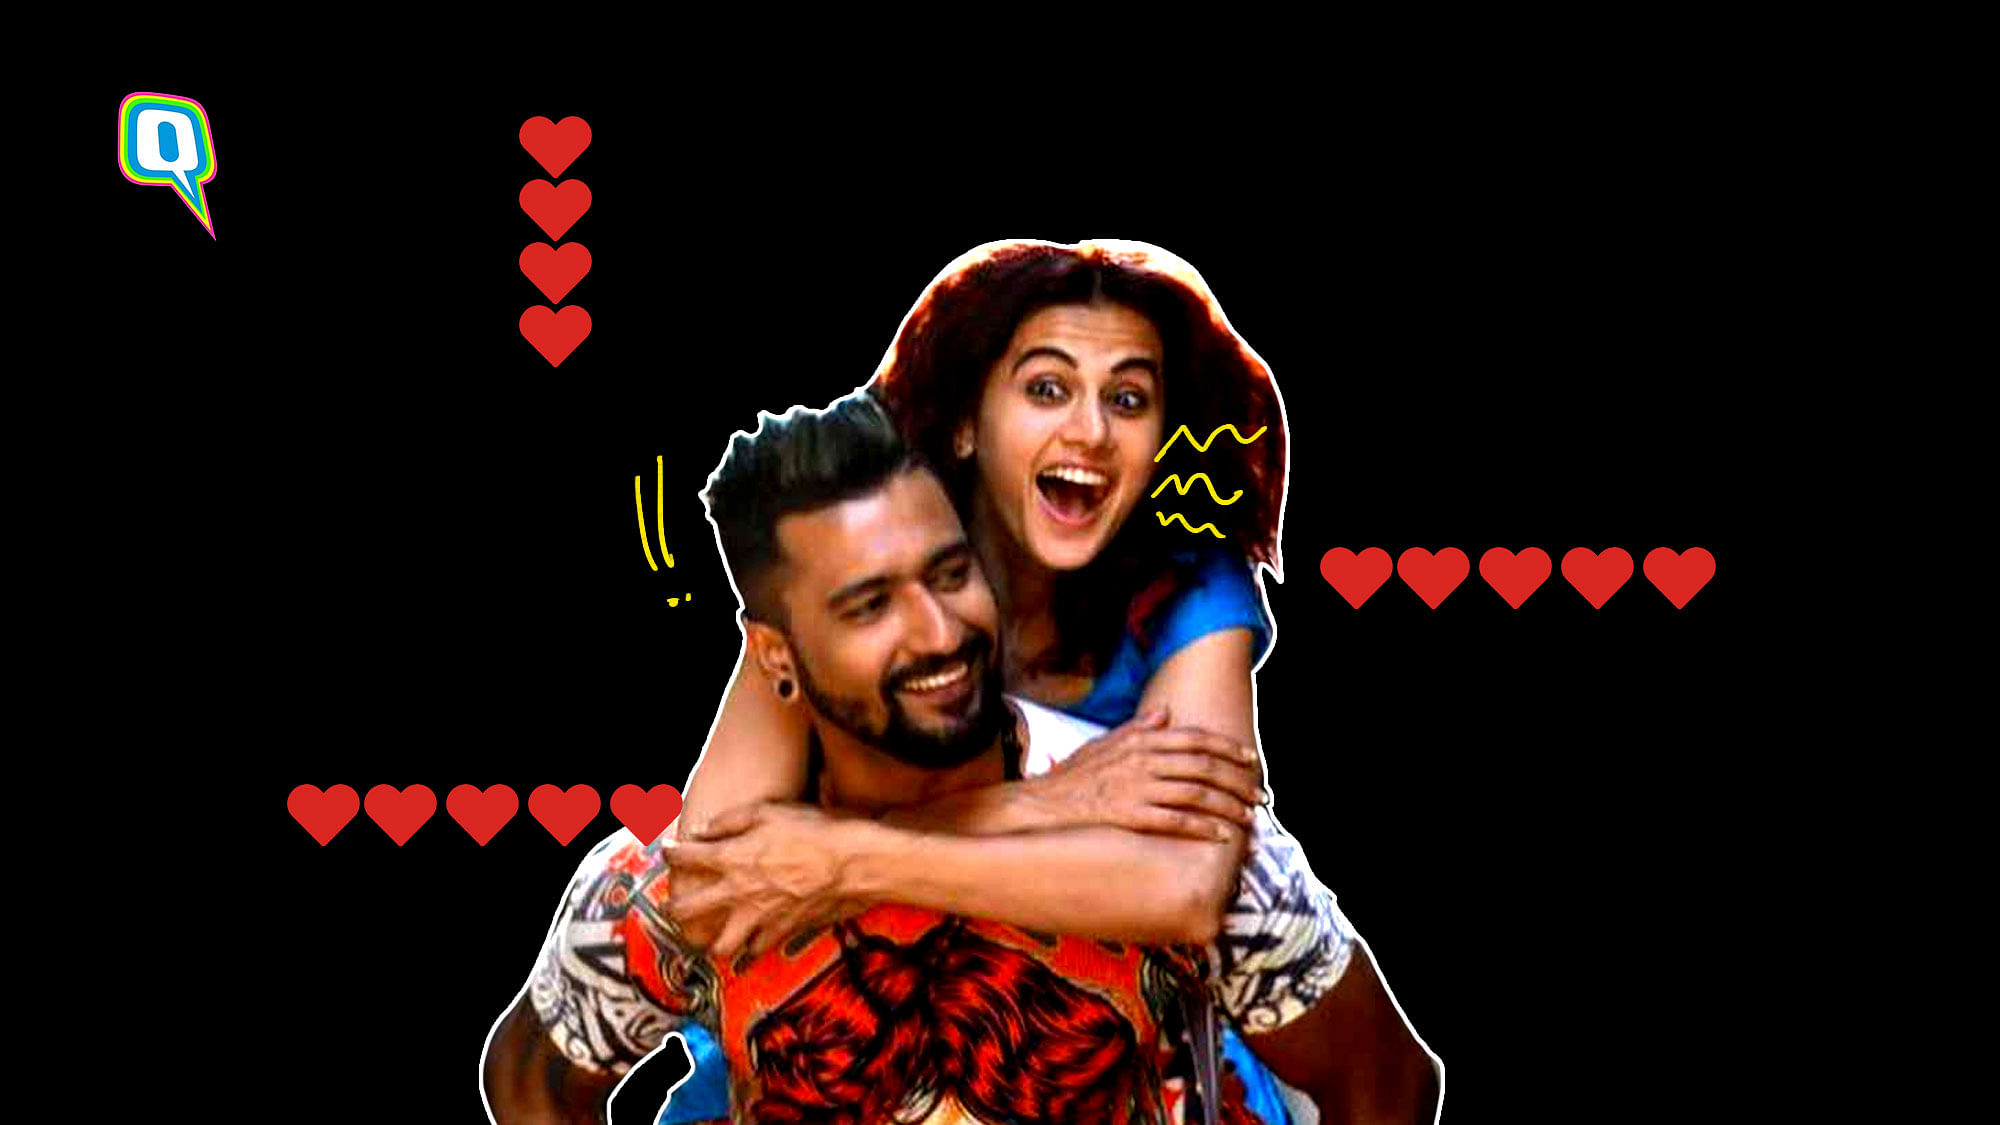 <i>Manmarziyaan</i> stays with you because of its messiness.&nbsp;